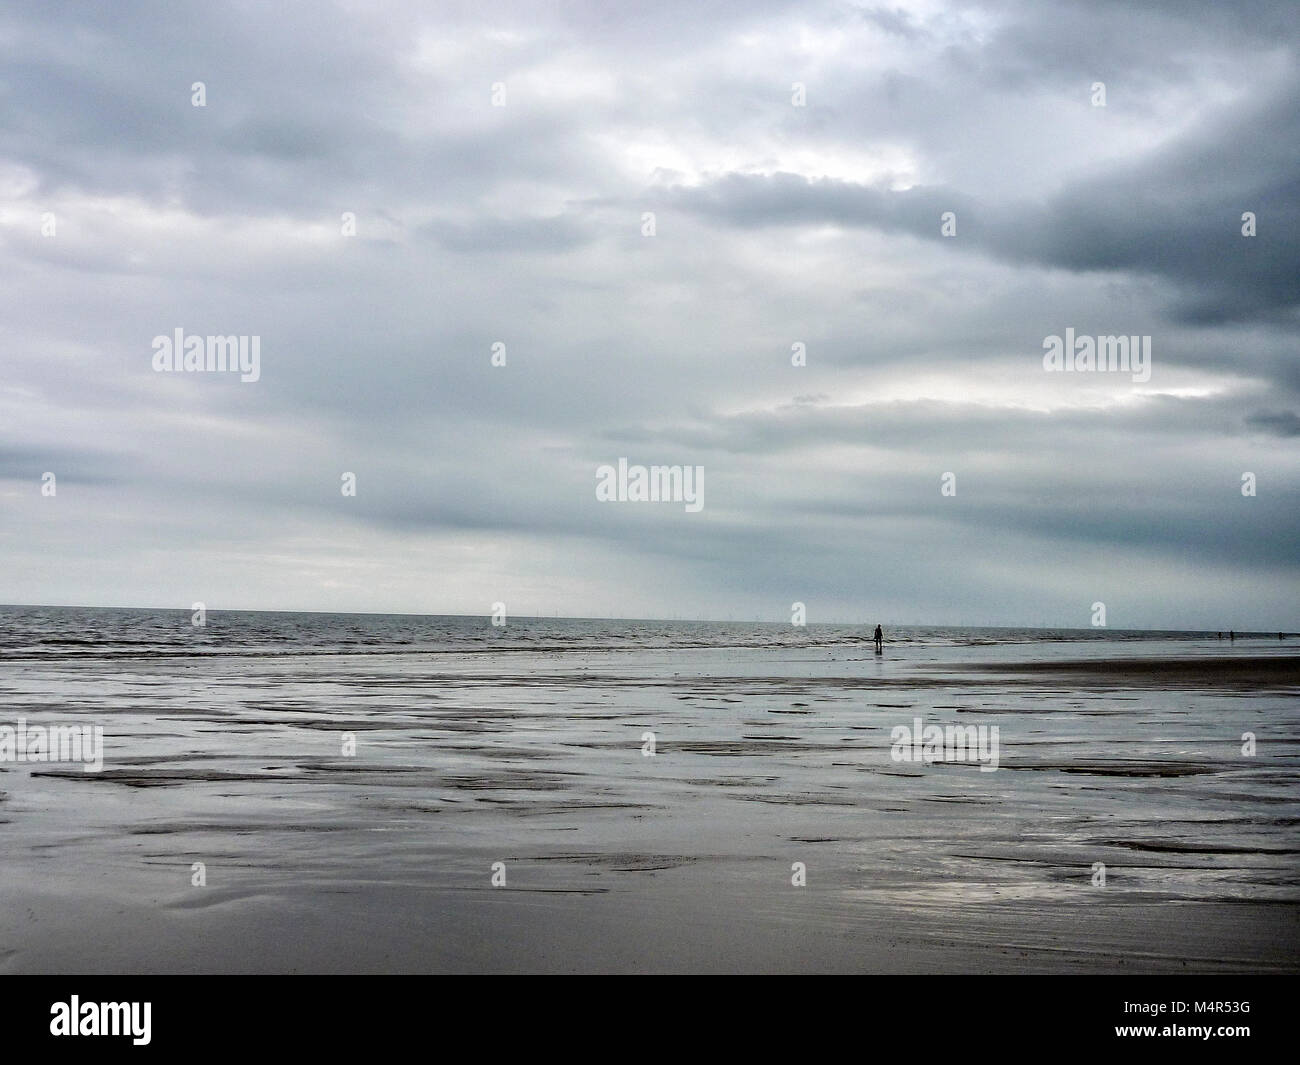 solitary person in the sea at Mablethorpe,Lincolnshire,England Stock Photo